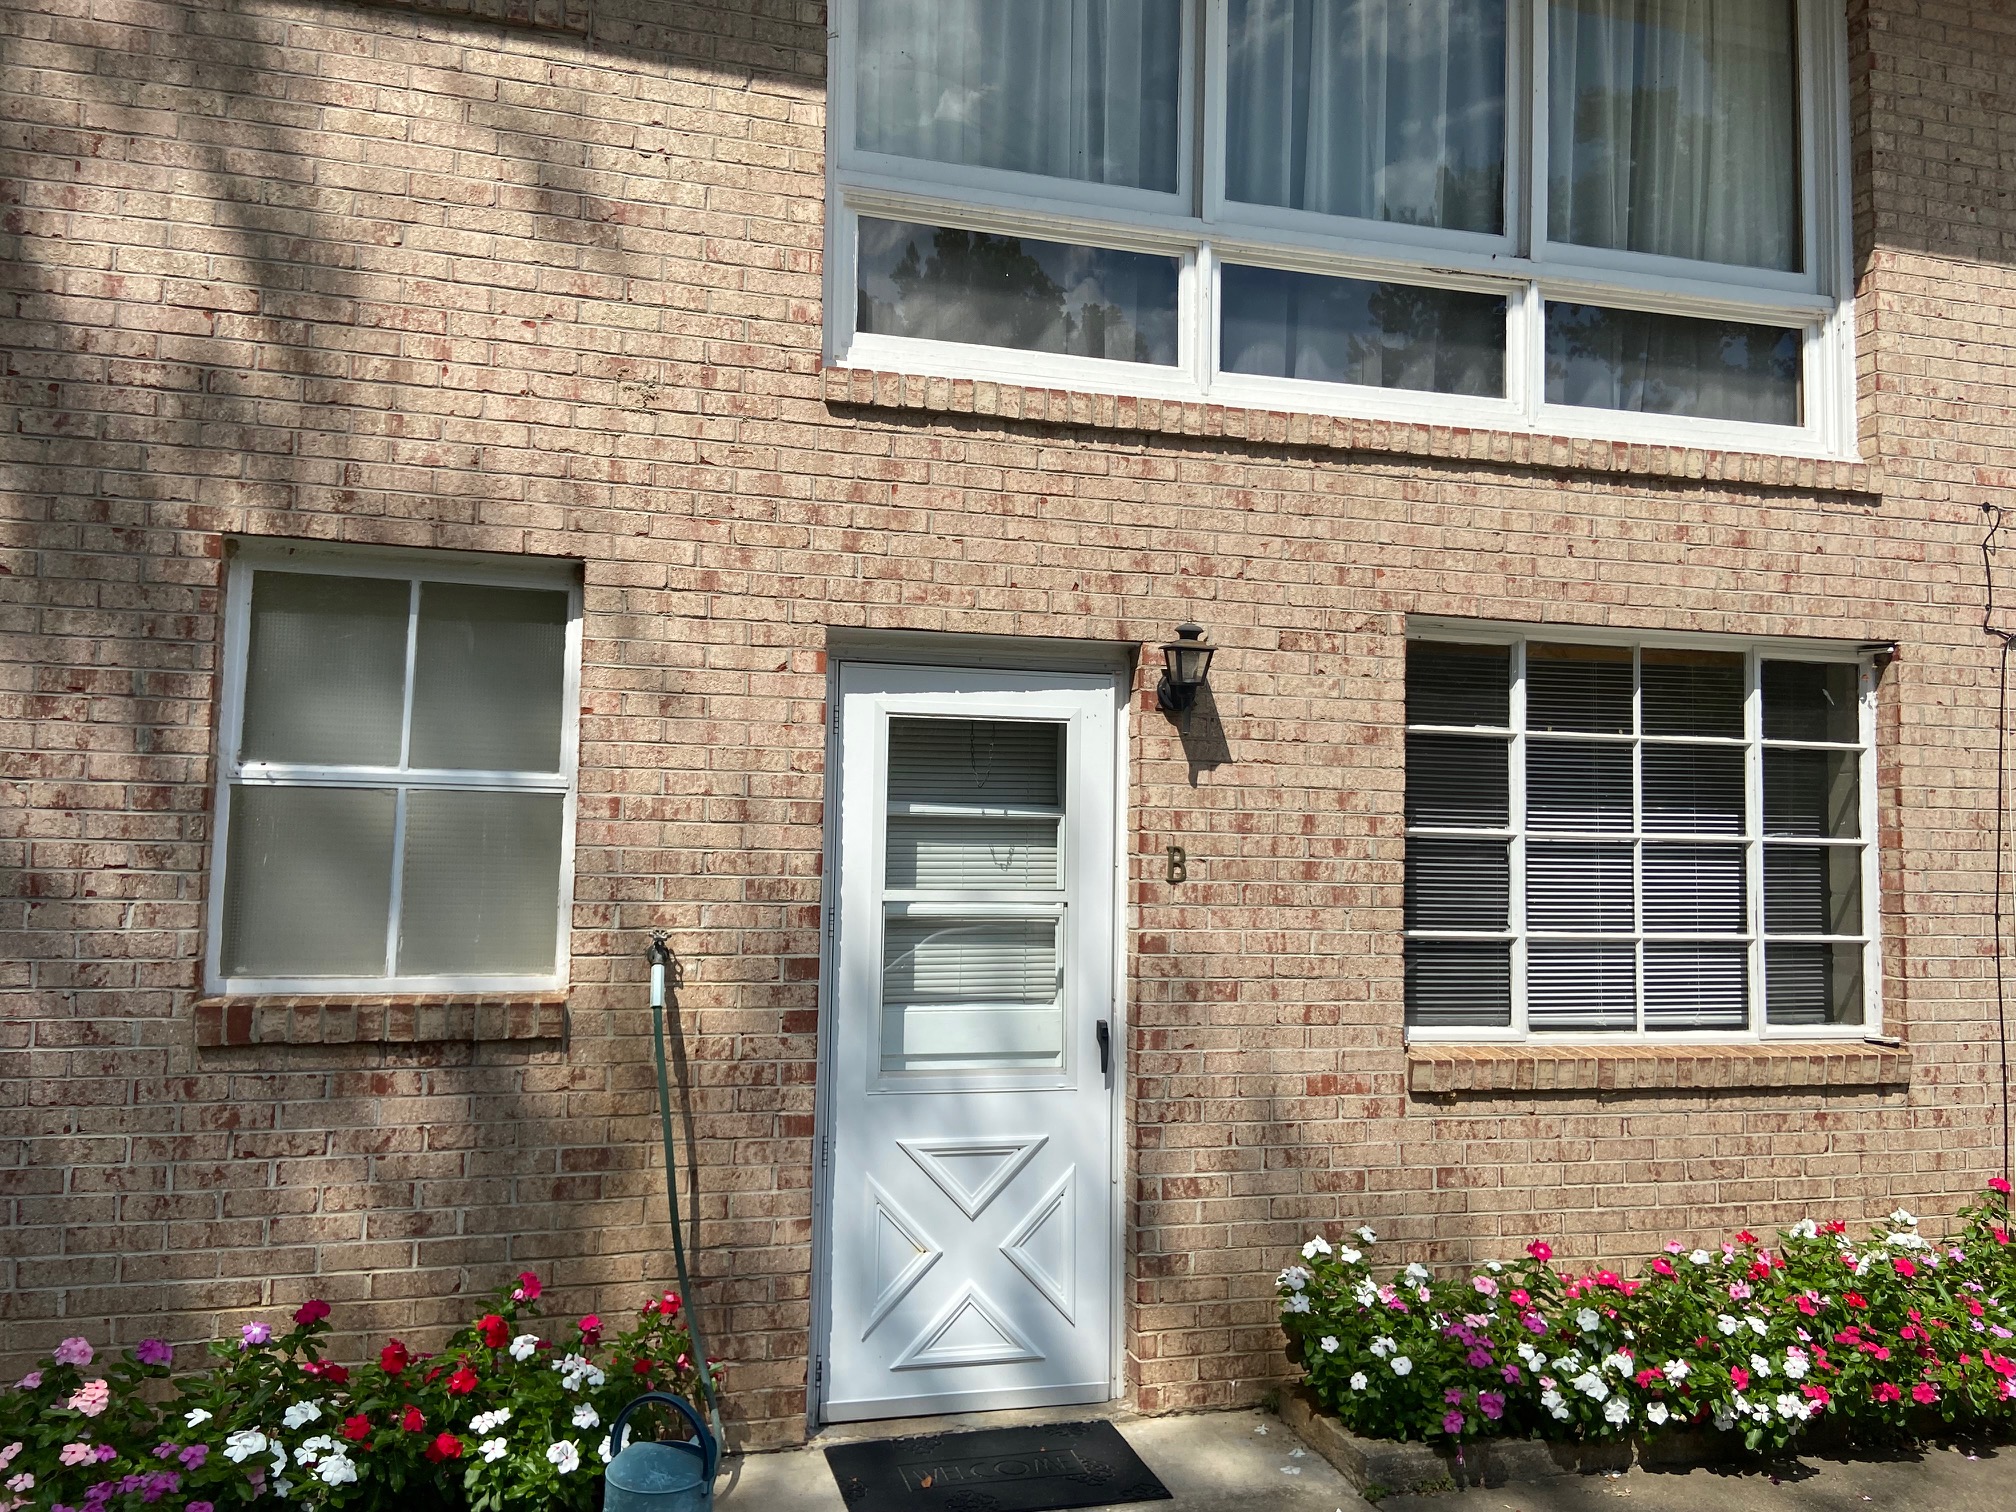 Privately Owned 1 Bed/ 1 Bath Downstairs Apartment Wade Hampton, Greenville